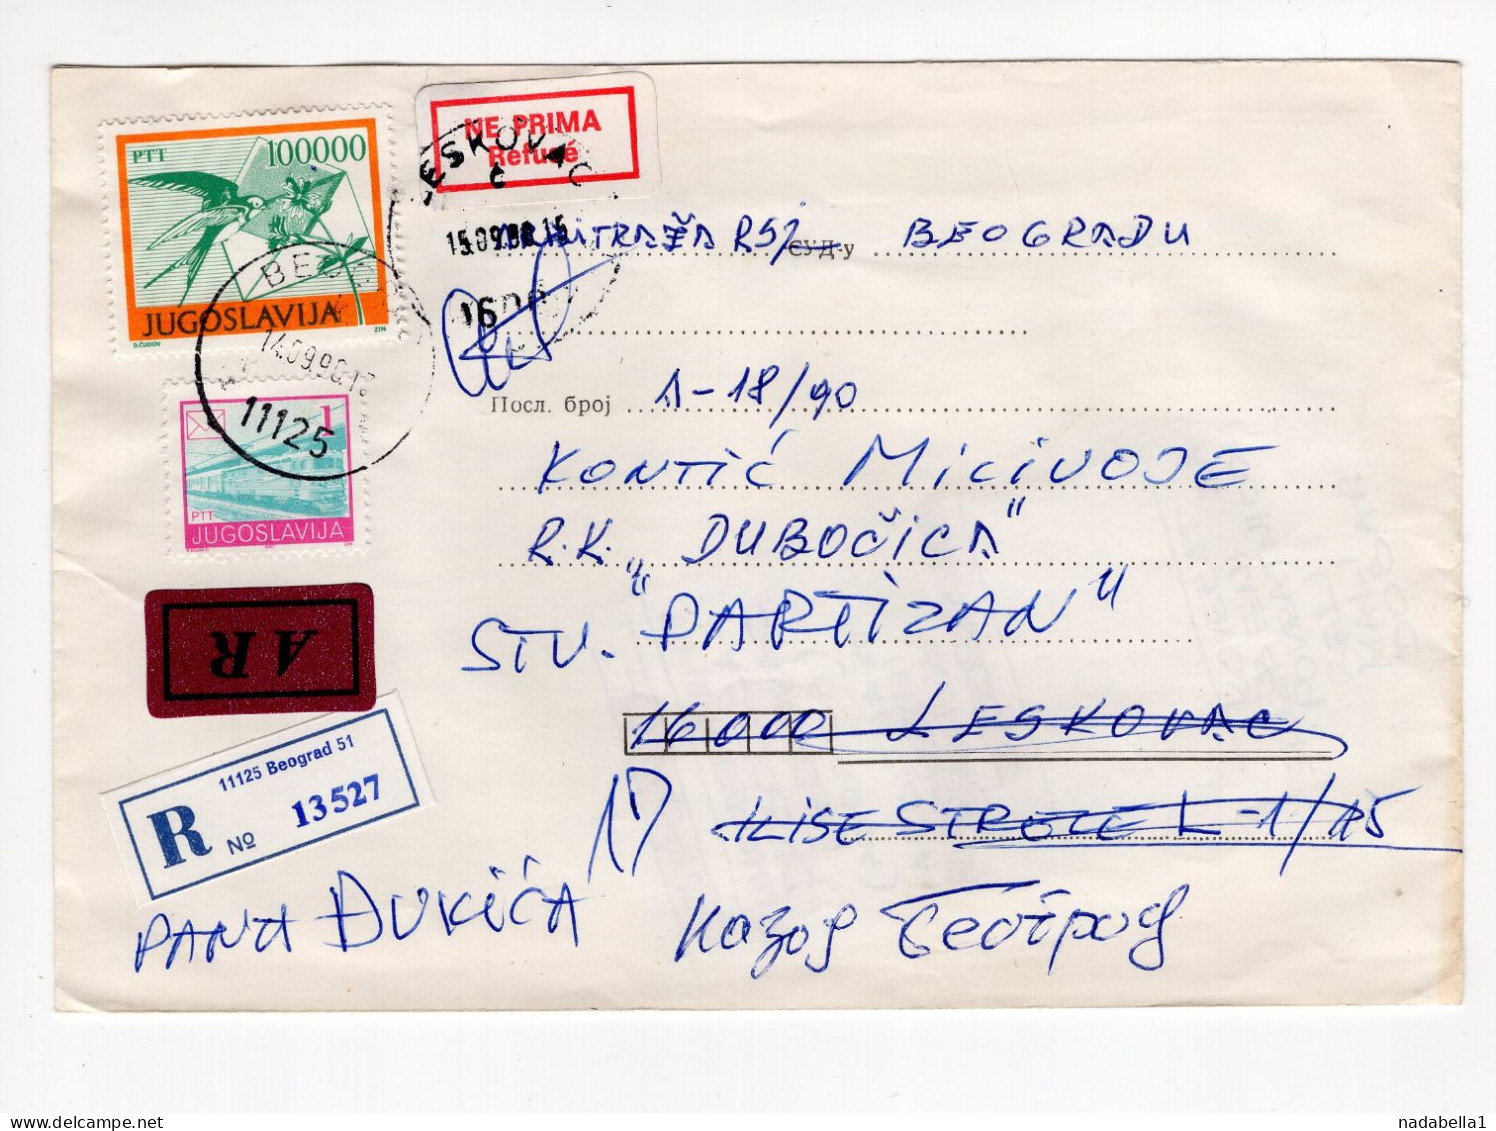 1990. YUGOSLAVIA,SERBIA,BELGRADE TO LESKOVAC AND BACK,AR,RECORDED COVER,INFLATION,INFLATIONARY MAIL,LABEL:REFUSED - Covers & Documents